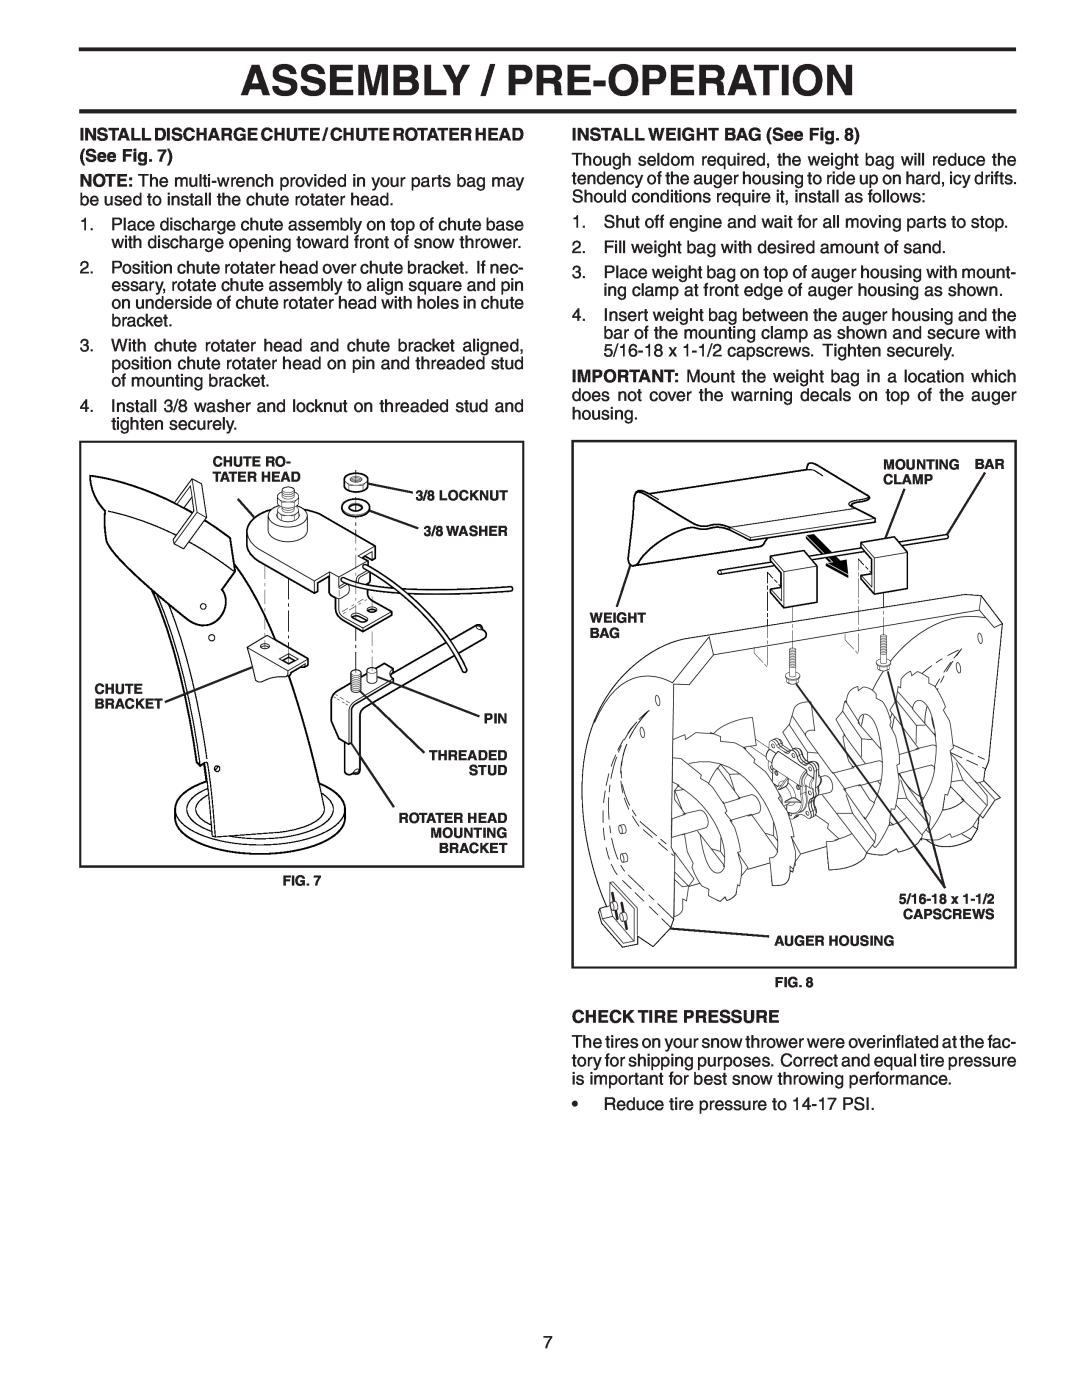 Poulan 183618 owner manual Assembly / Pre-Operation, INSTALL WEIGHT BAG See Fig, Check Tire Pressure 